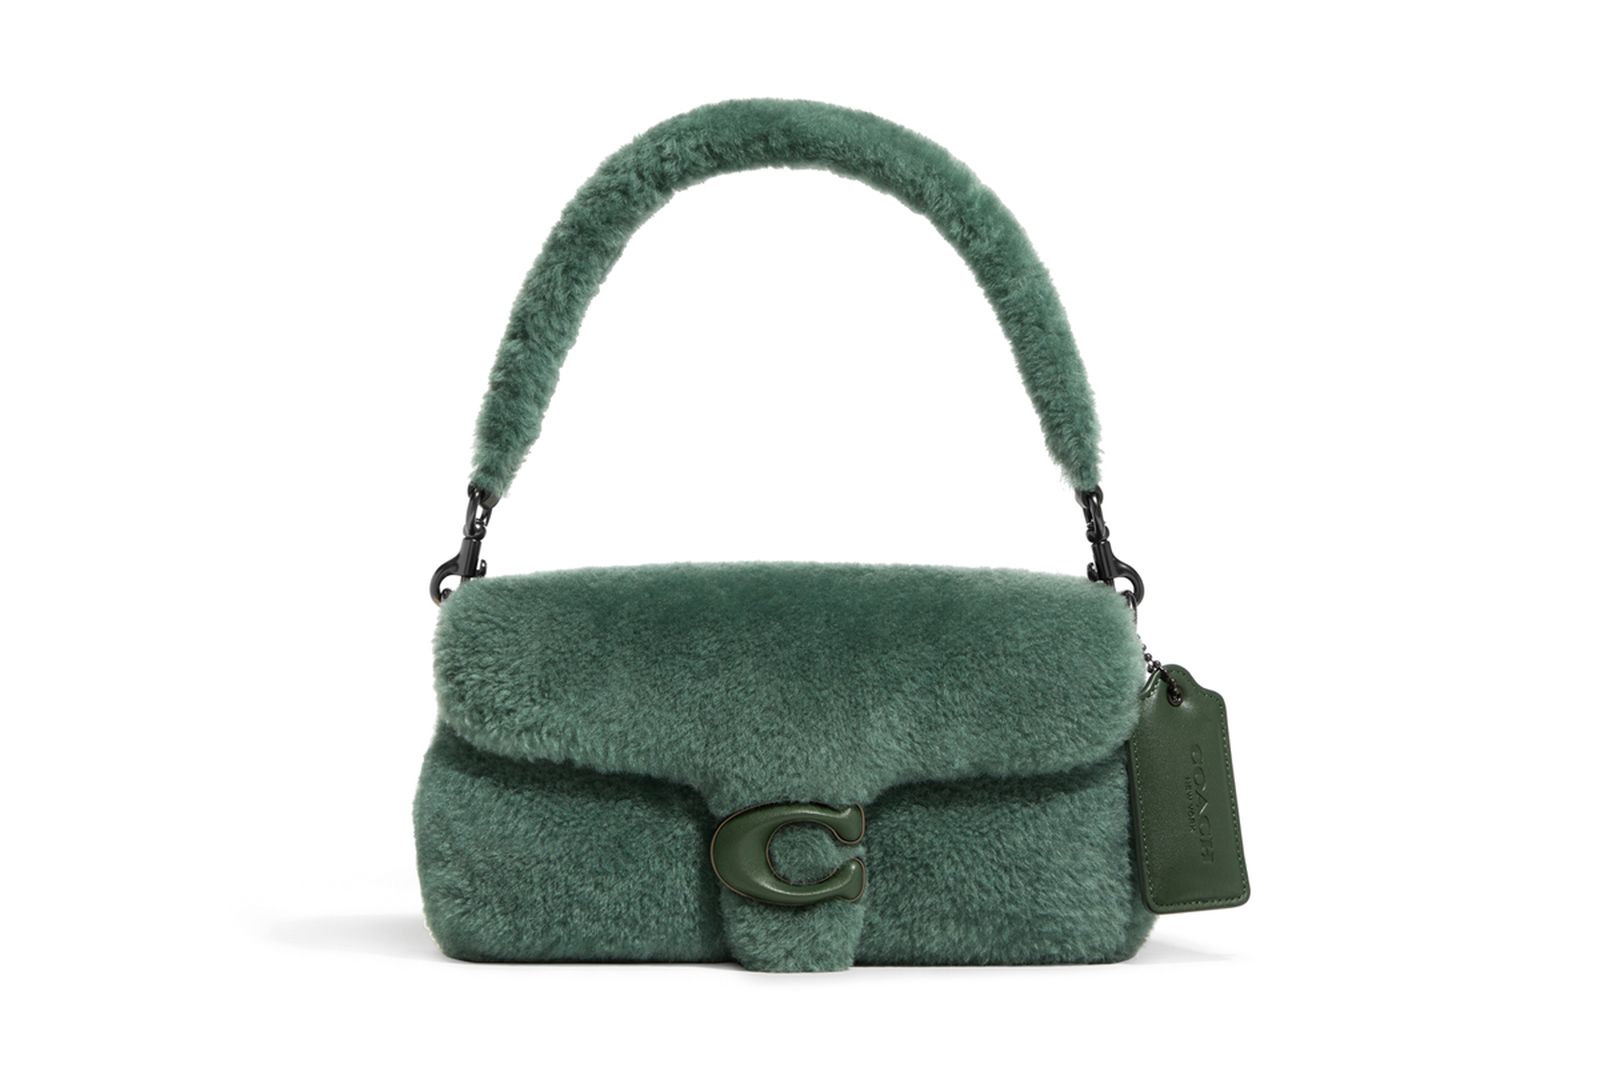 Coach's Pillow Tabby Returns for FW22 in Furry Shearling